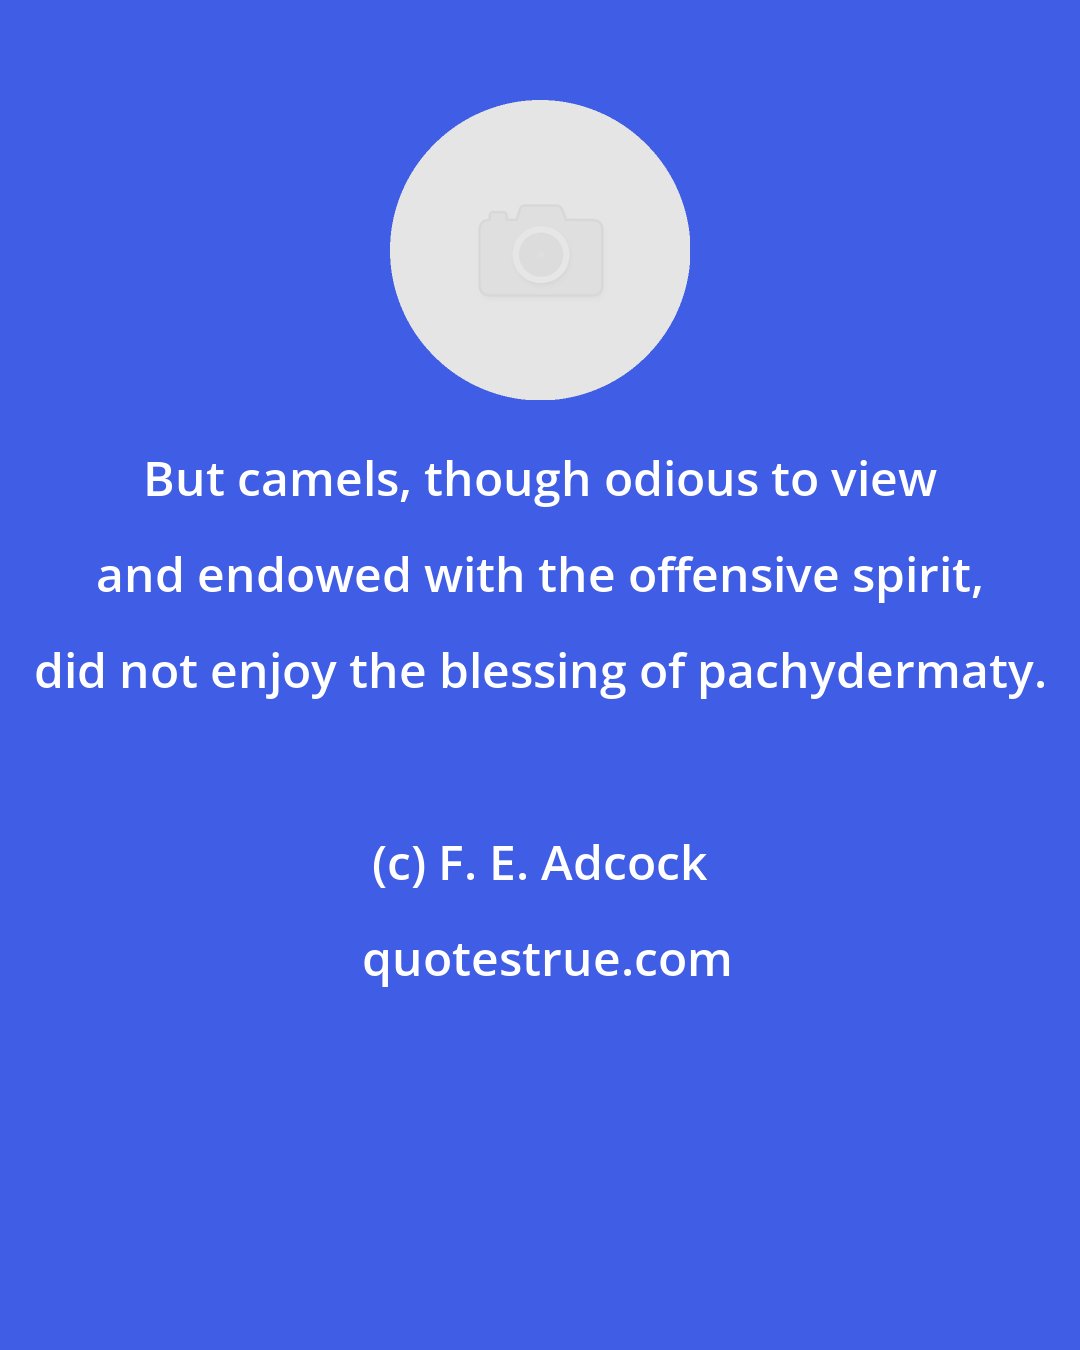 F. E. Adcock: But camels, though odious to view and endowed with the offensive spirit, did not enjoy the blessing of pachydermaty.